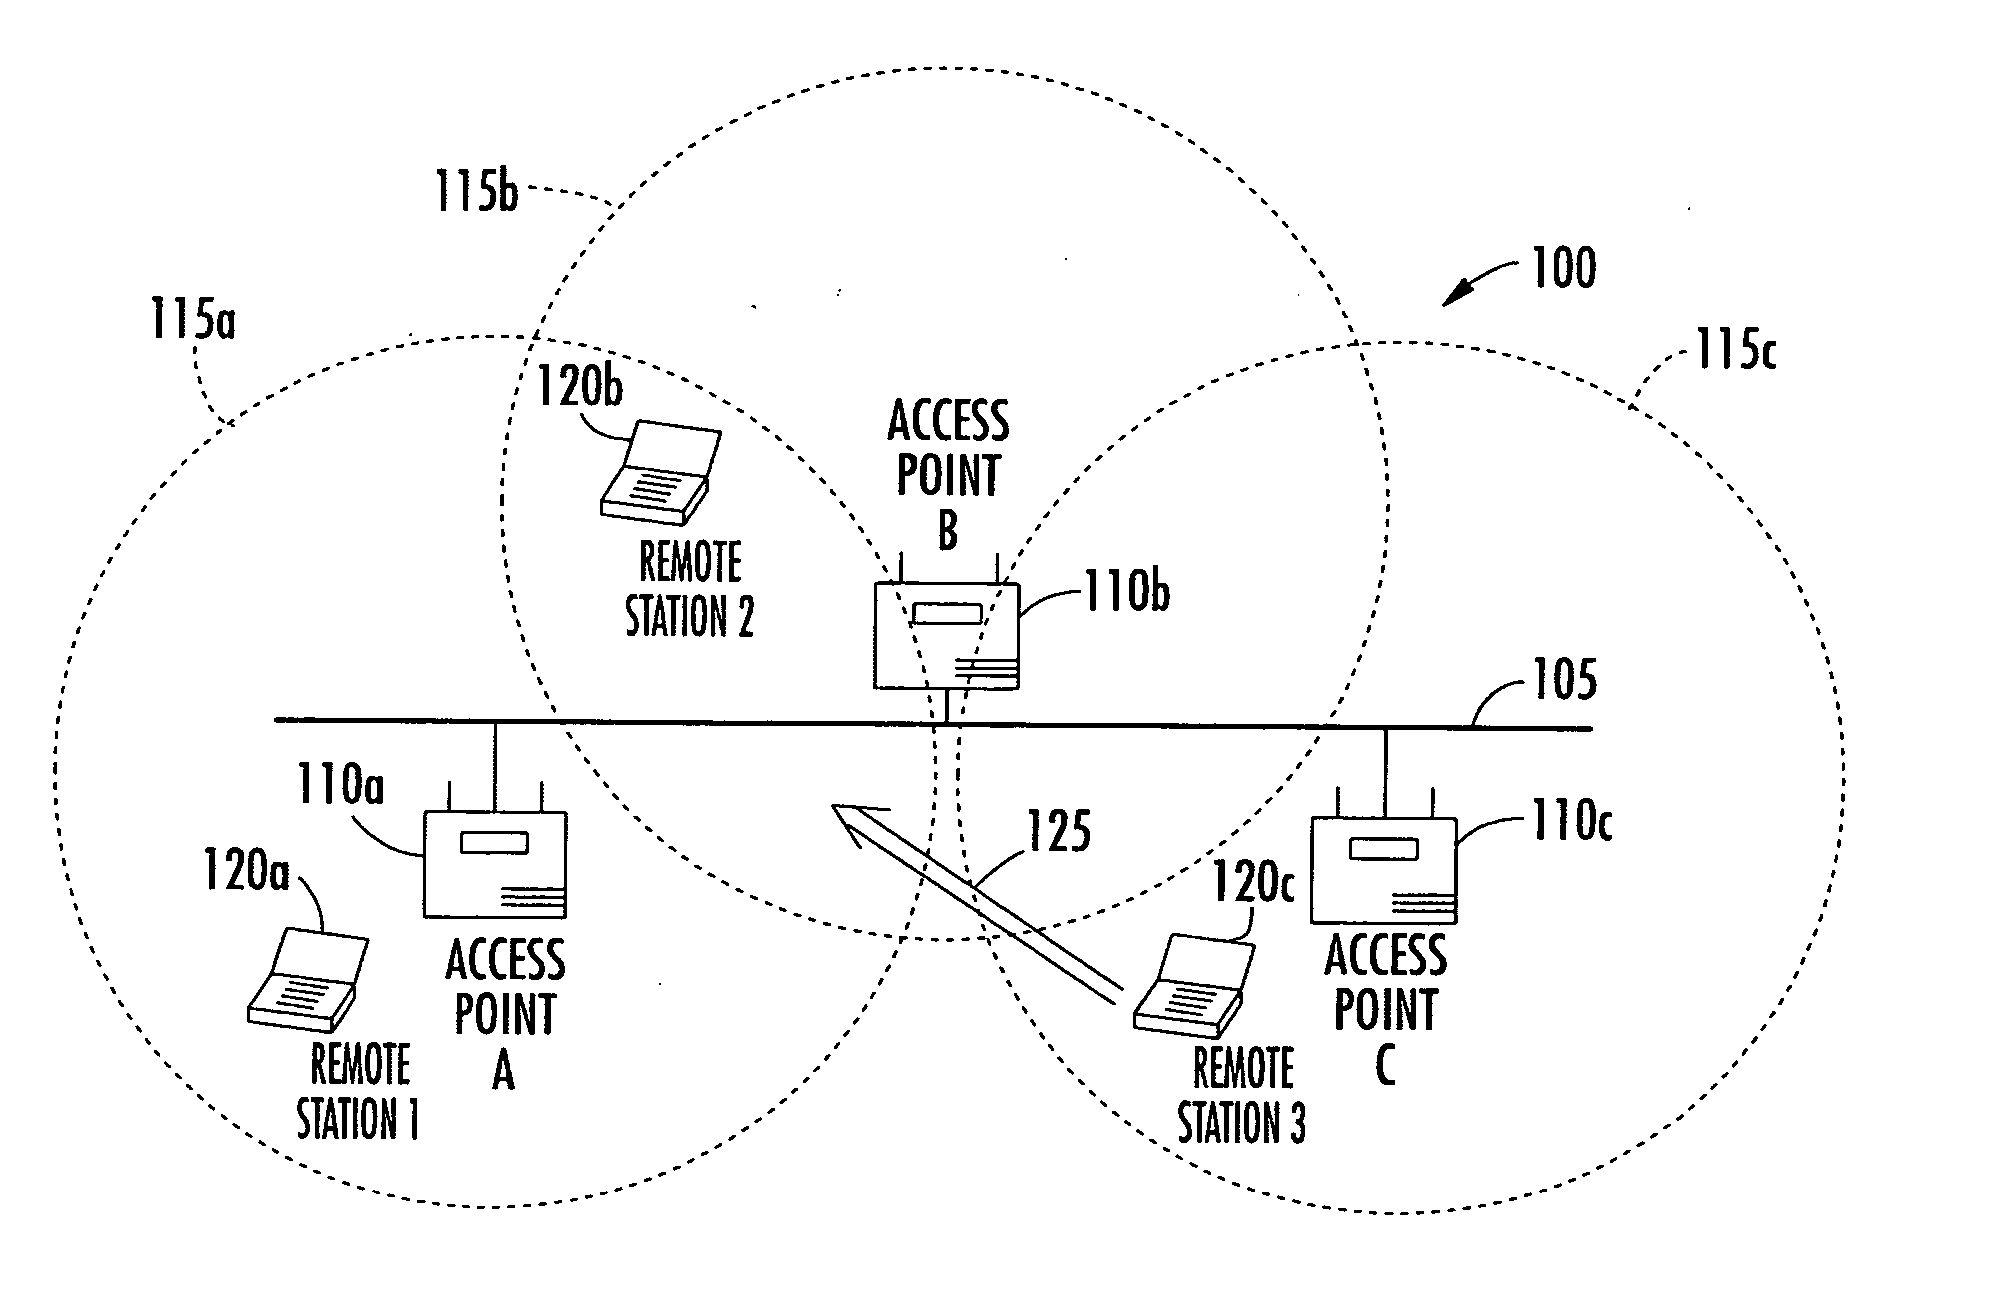 Antenna steering for an access point based upon probe signals